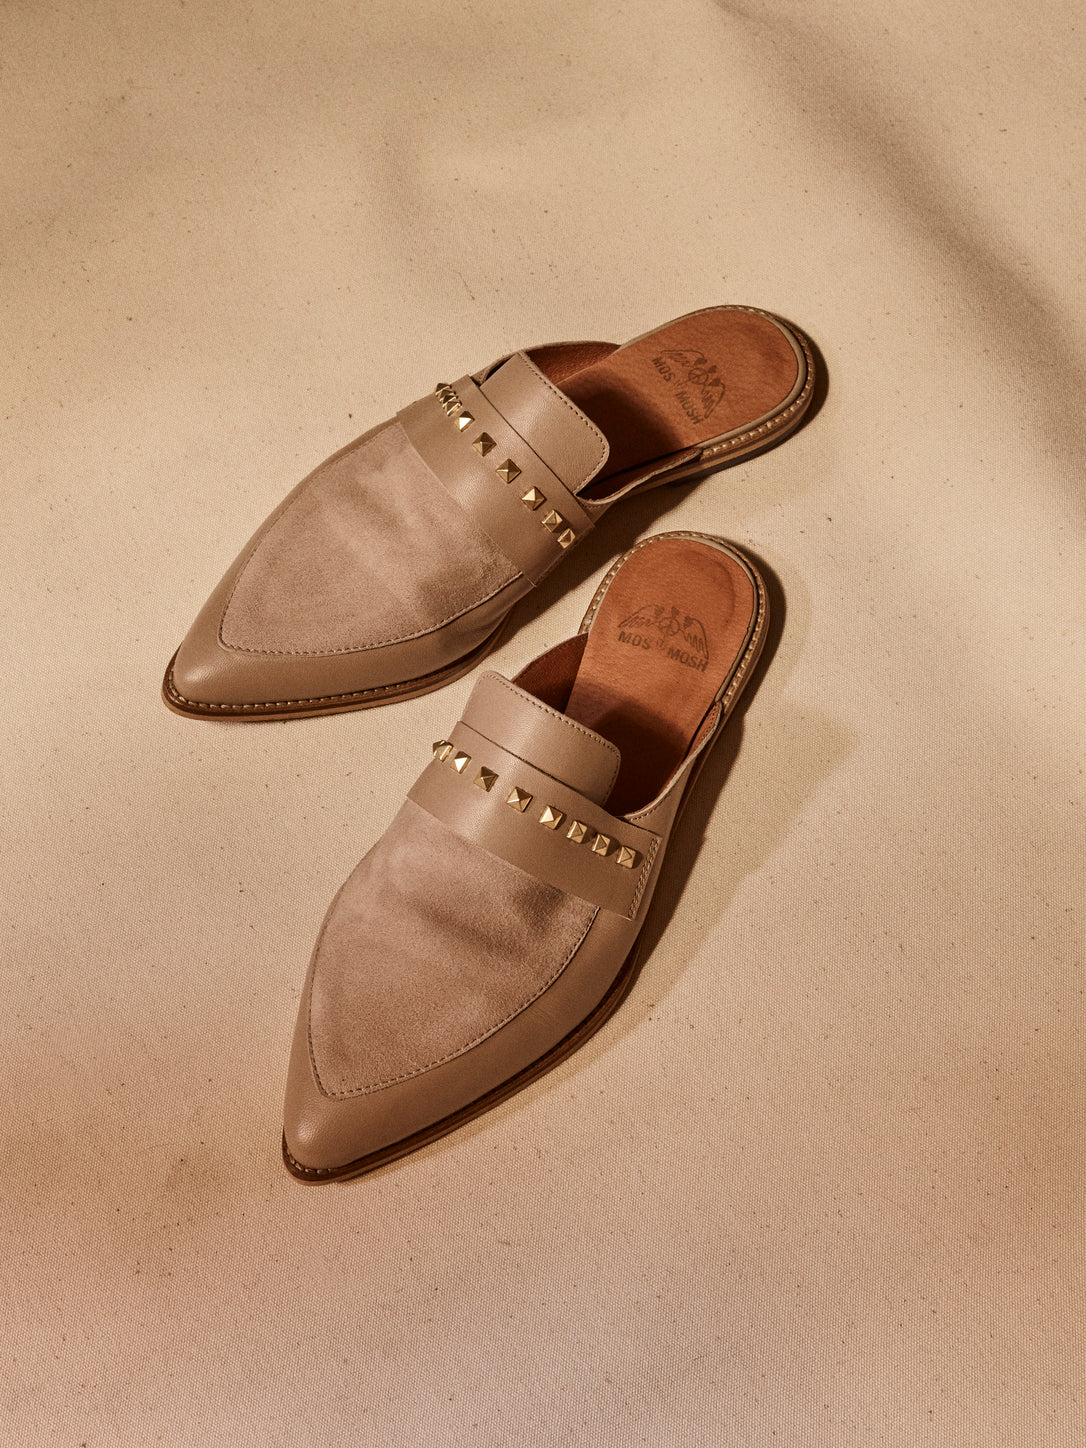 chaptertwo_mos_mosh_mm_doha_suede_flats